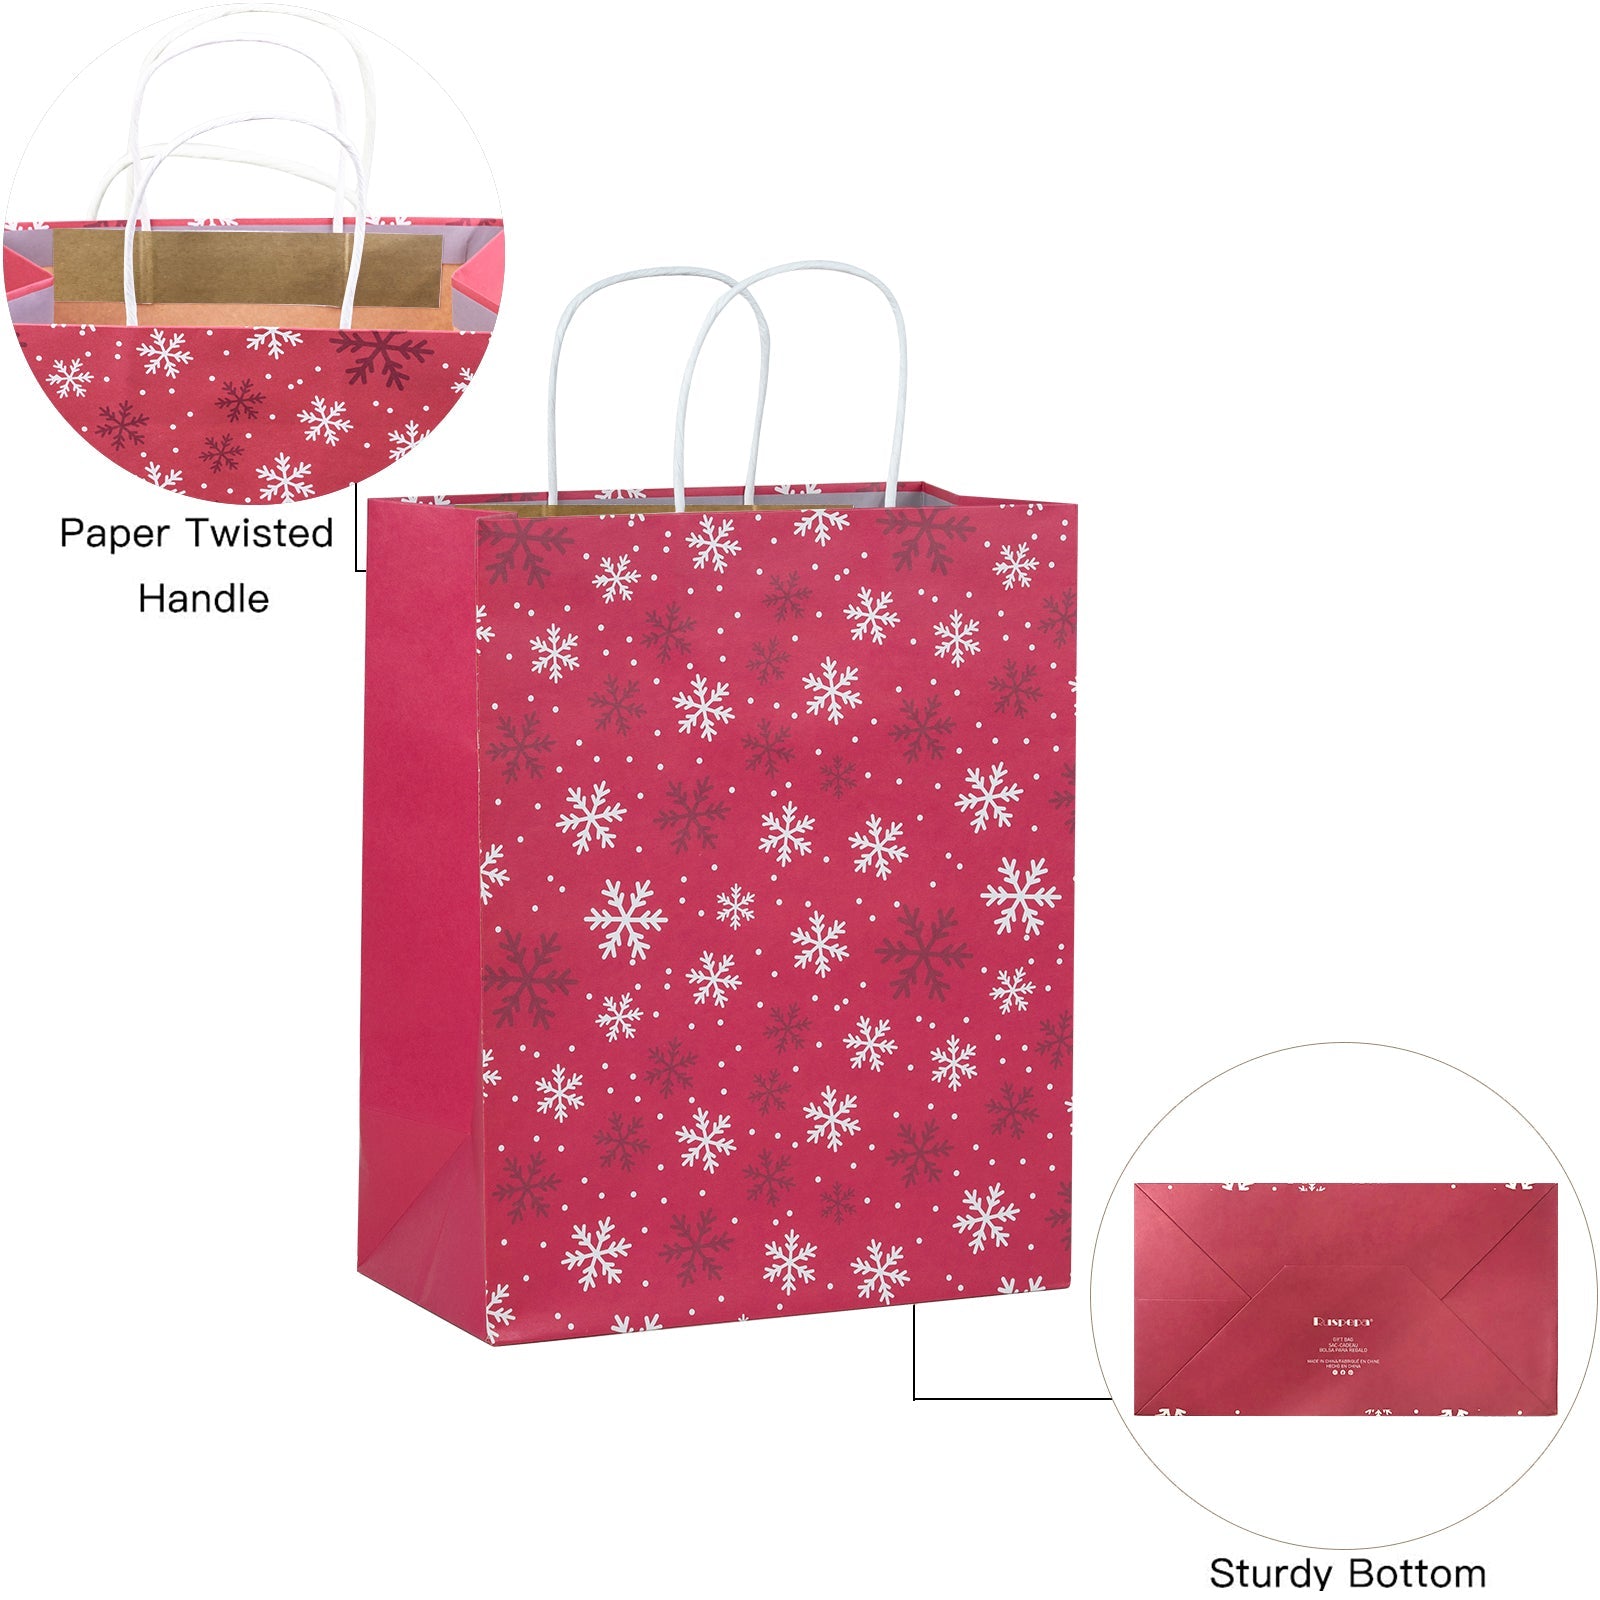 Assort Large Christmas Gift Bags - Snowflakes/ Plaid/ Pine Trees - 9 Pack,10x5x13 inch